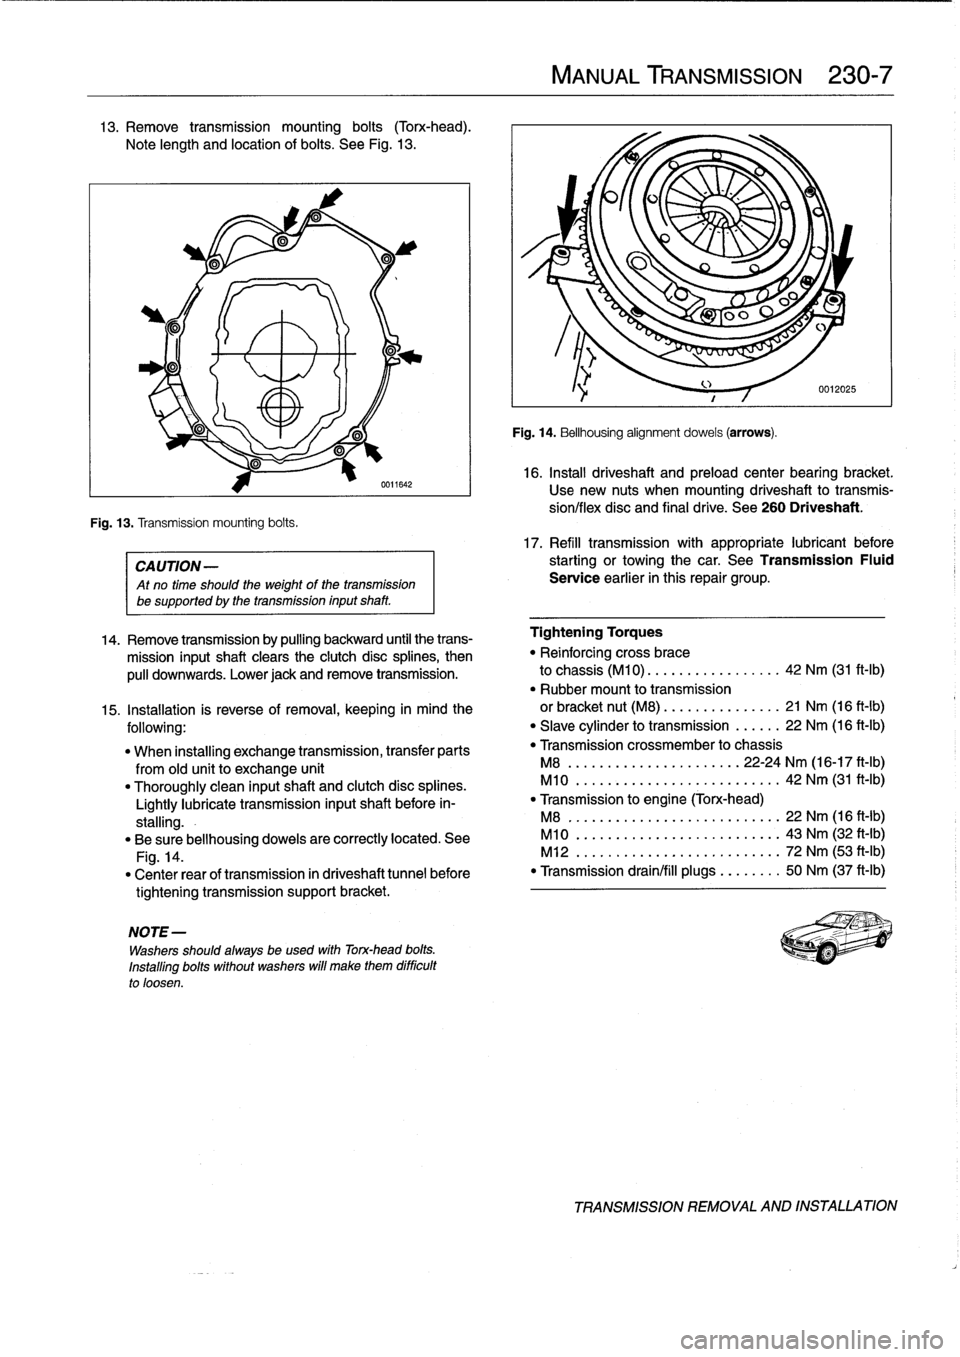 BMW 328i 1995 E36 Workshop Manual 13
.
Remove
transmission
mounting
bolts
(Torx-head)
.

Note
length
and
location
of
bolts
.
See
Fig
.
13
.

Fig
.
13
.
Transmission
mounting
bolts
.

0611642

CA
UTION-

Atno
time
should
the
weight
of
